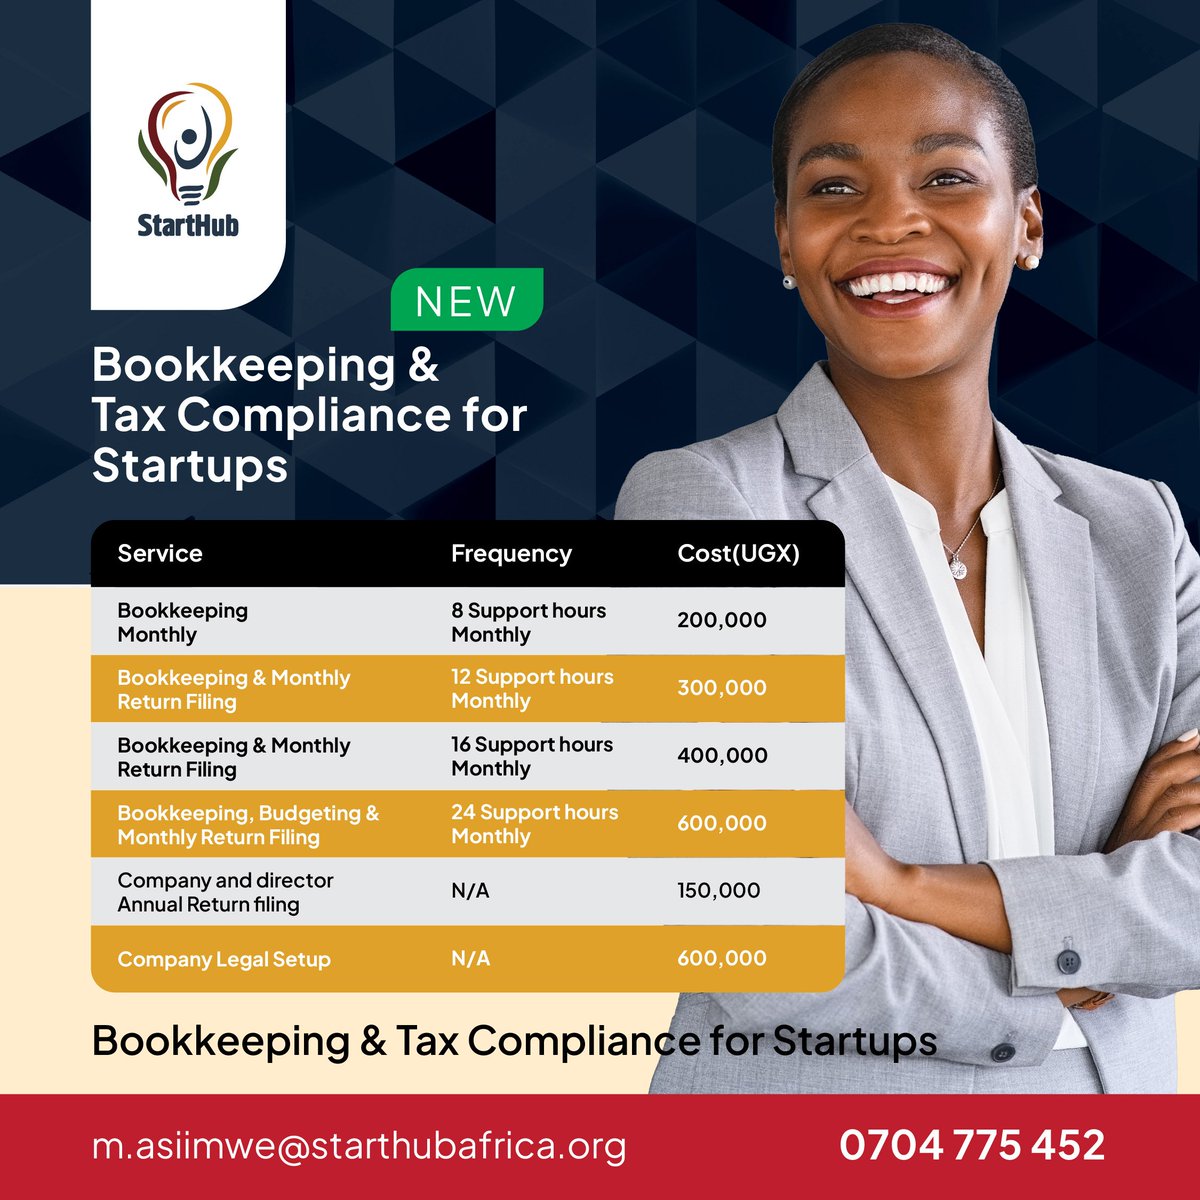 Ready to kickstart your entrepreneurial journey? Look no further! Sail smoothly through the seas of entrepreneurship with our affordable bookkeeping and tax compliance services. Register now or contact us for more details: starthubafrica.org/accounting Set sail for success today!